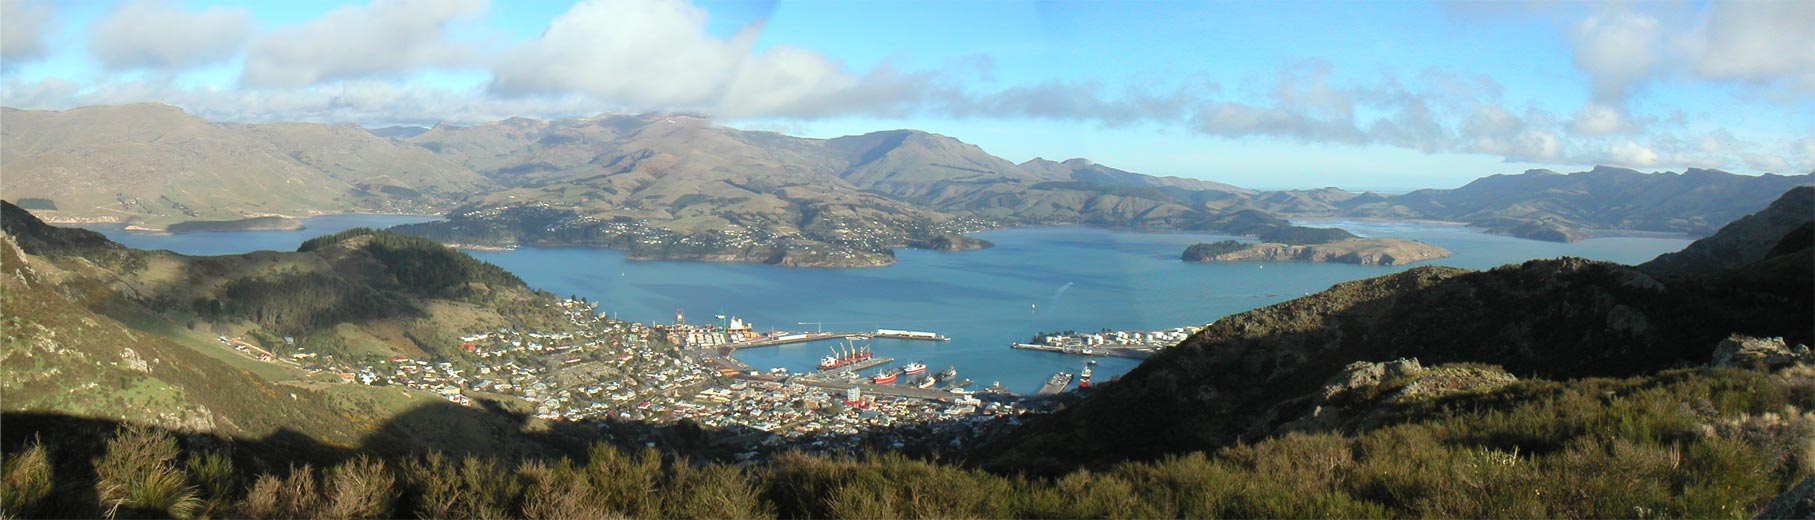 When we got to the ridge, we could see down to the other side, a place called Lyttelton Harbour.  What an amazing location for a port!  A tunnel actually runs through the ridge I am standing on, connecting Lyttelton with Christchurch.